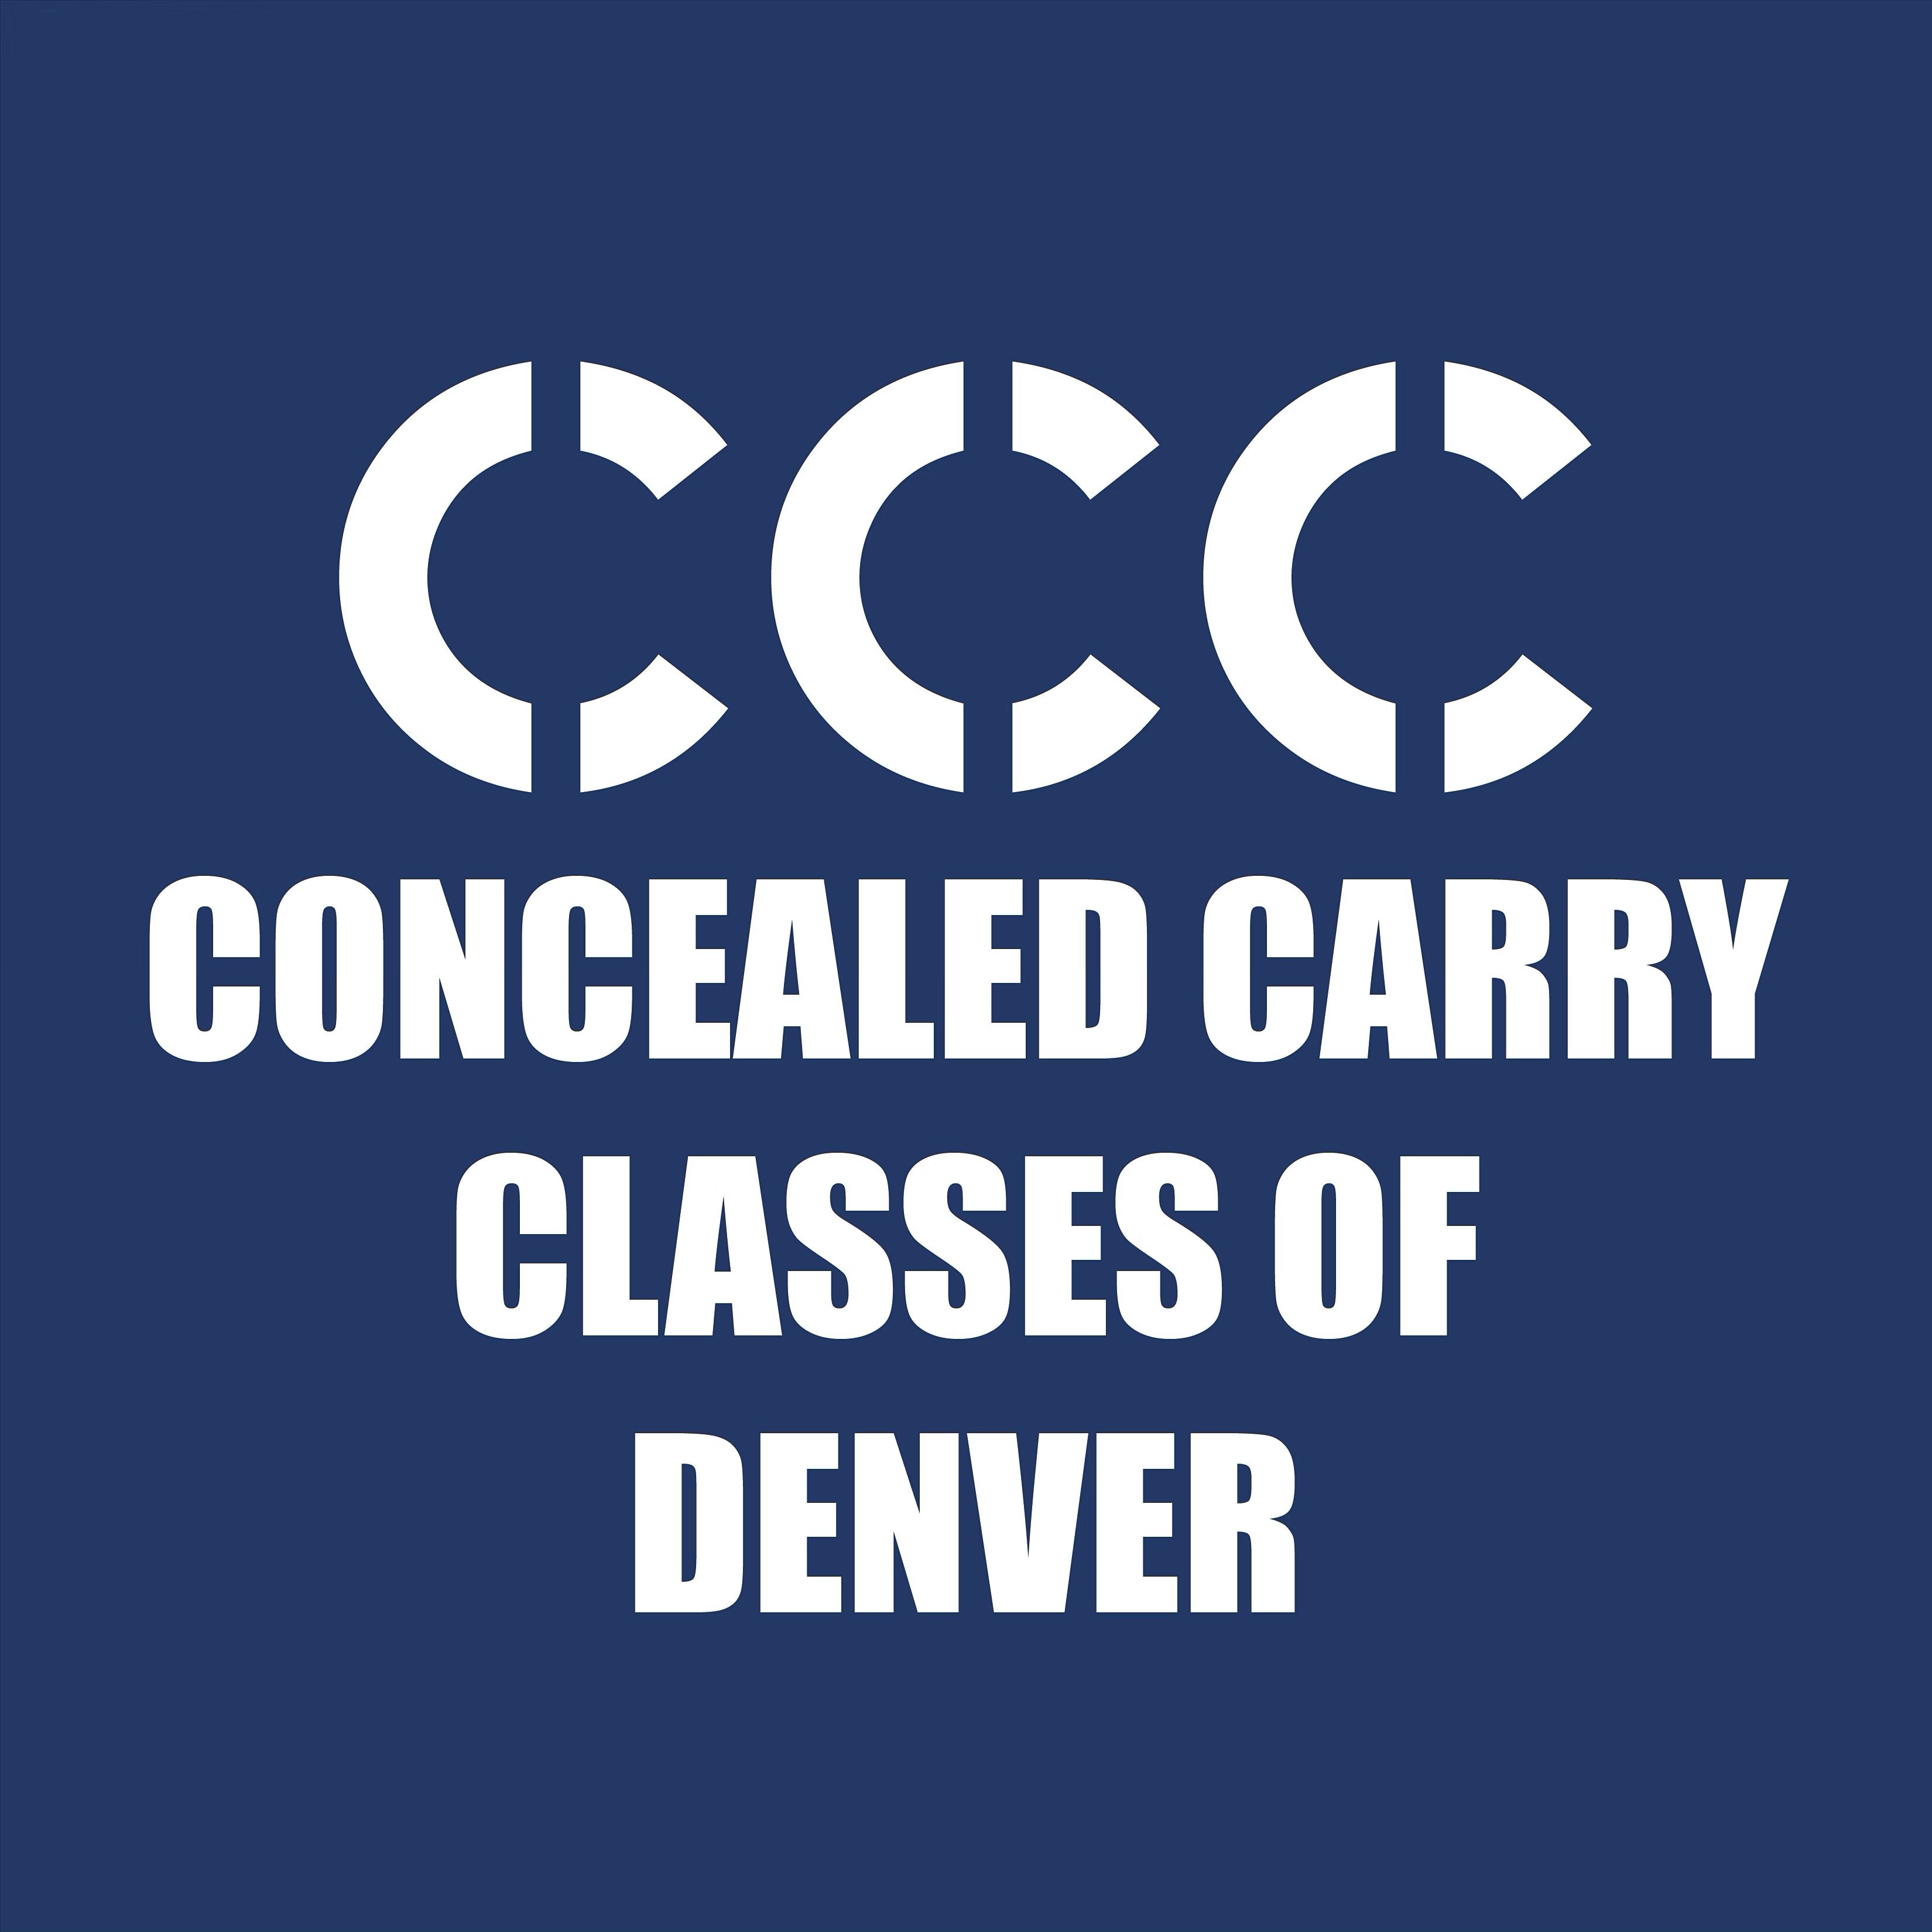 Concealed Carry Classes Of Denver